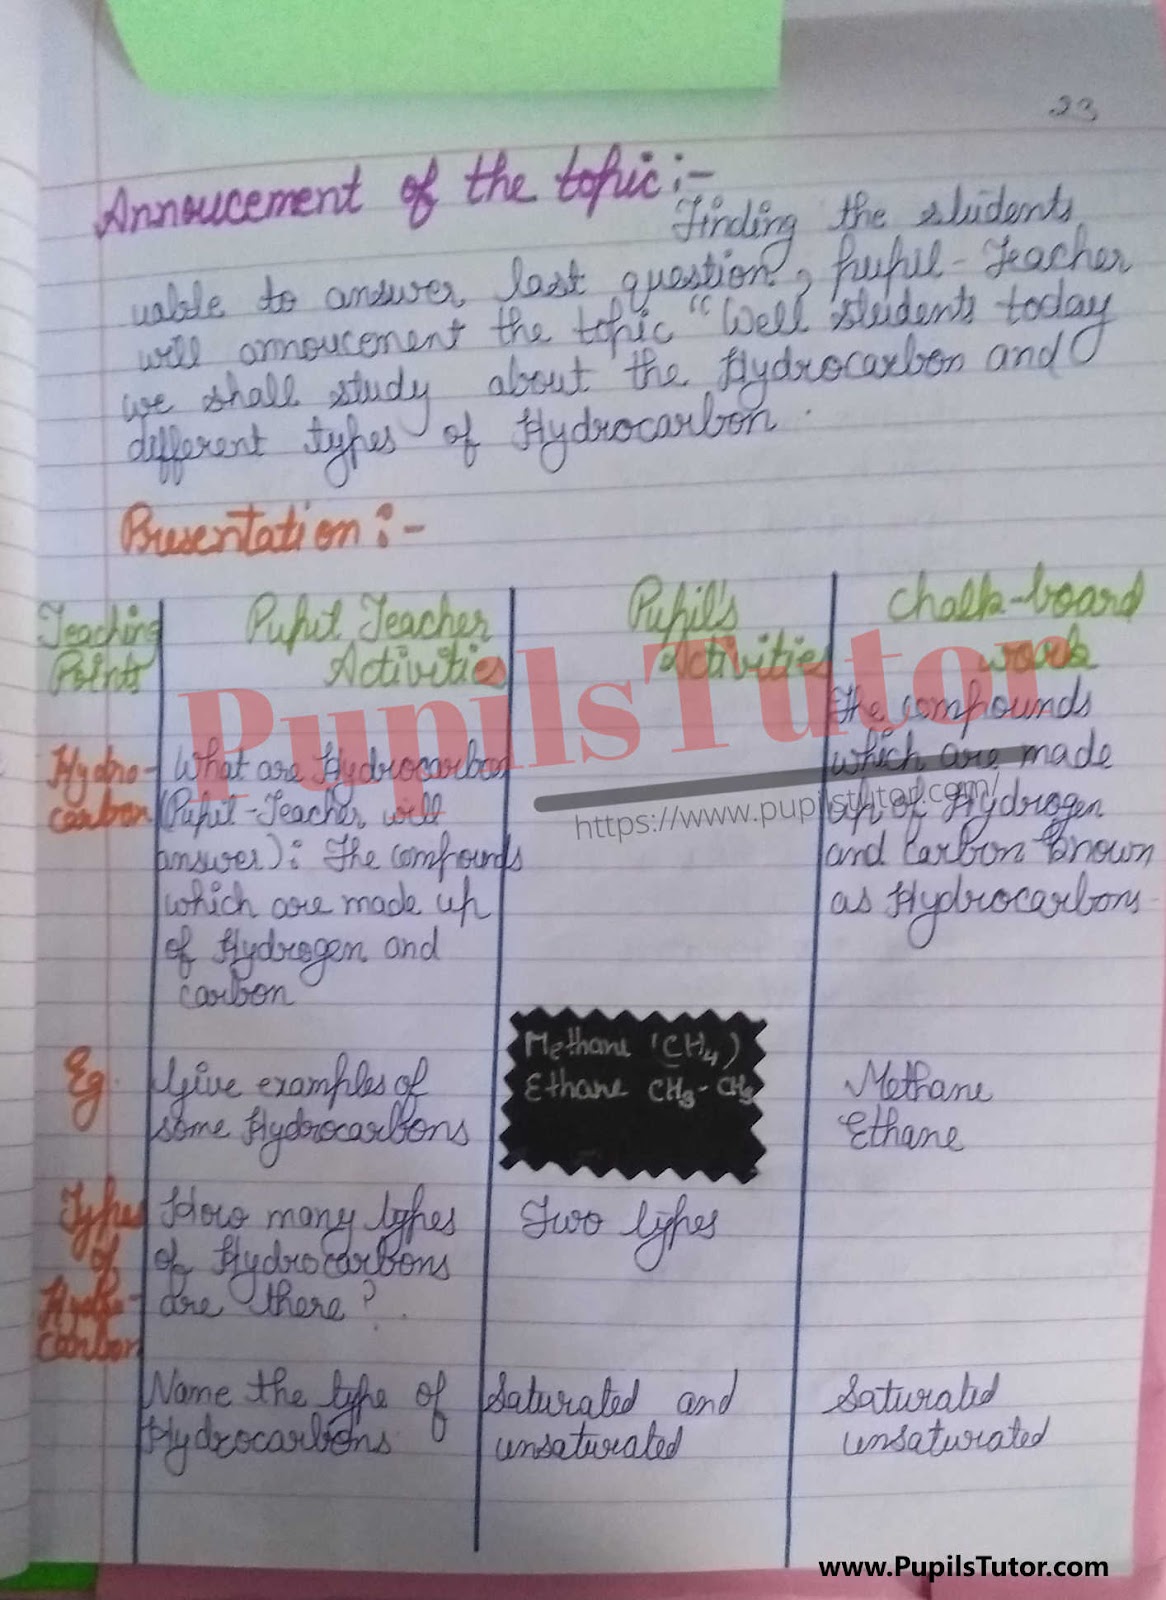 Class/Grade 10 Chemistry Lesson Plan On Types Of Hydrocarbons For CBSE NCERT KVS School And University College Teachers – (Page And Image Number 3) – www.pupilstutor.com